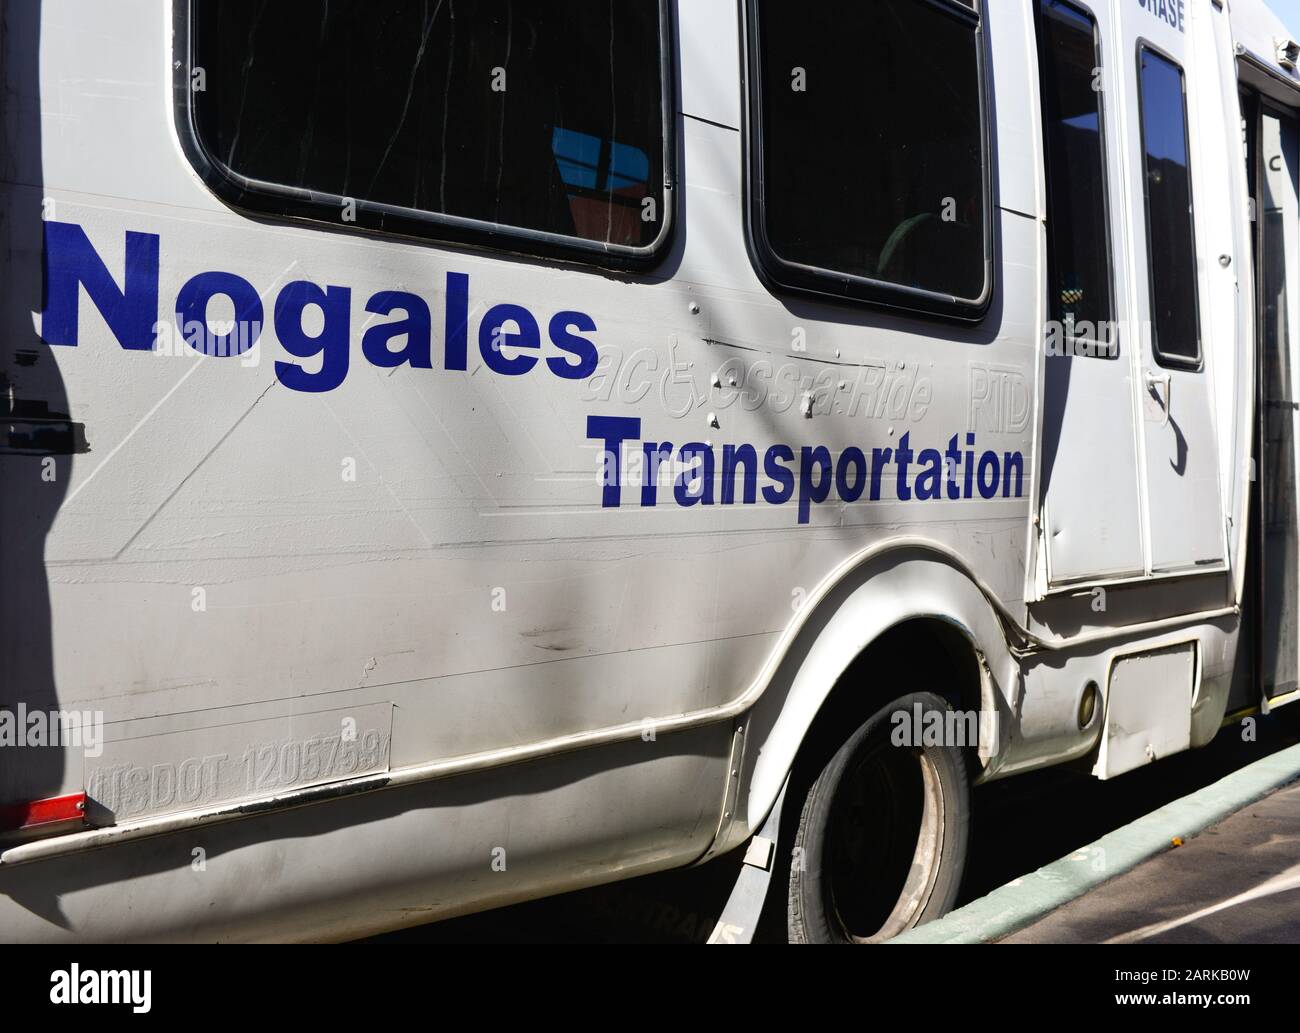 A white repainted and well worn small transport Bus with blue lettering reading Nogales Transportation, often used for cross Border transport, parked Stock Photo